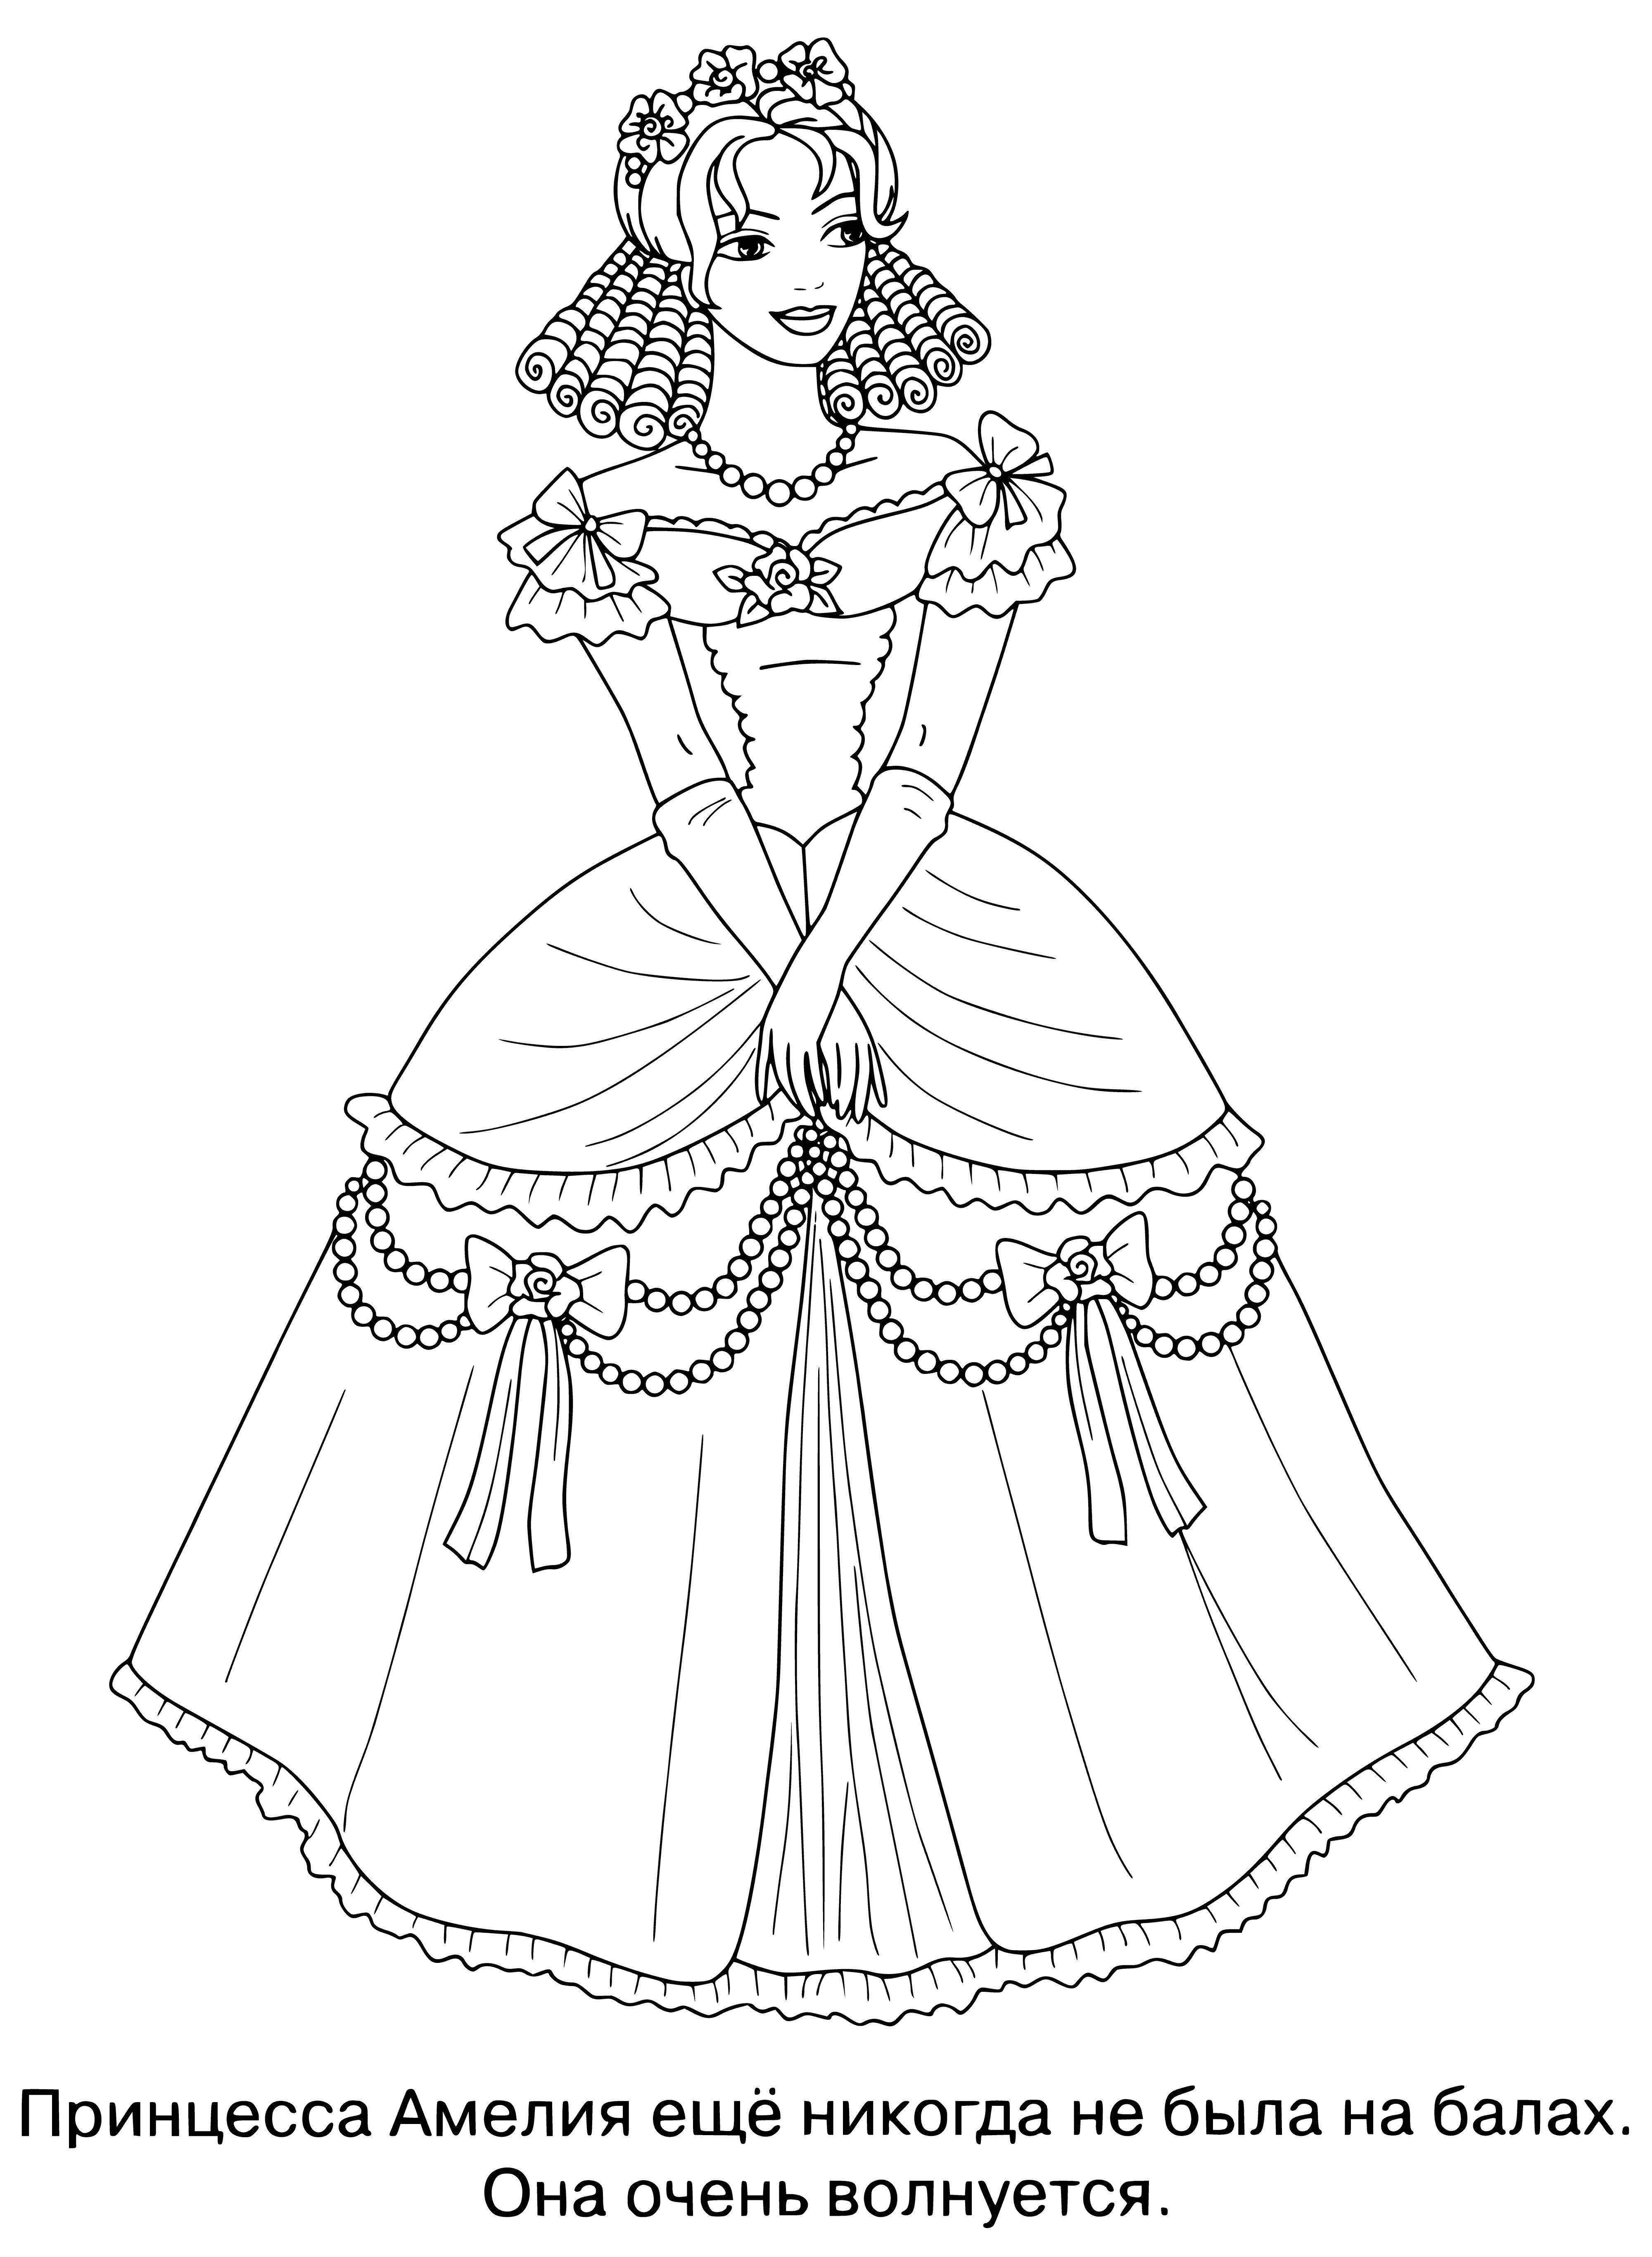 coloring page: Princess Amelia stands in the middle of a group of excited princesses in colorful dresses and beautiful hairdos amongst flowers and trees. Holding a pink wand and wearing a pink dress, she beams with joy.